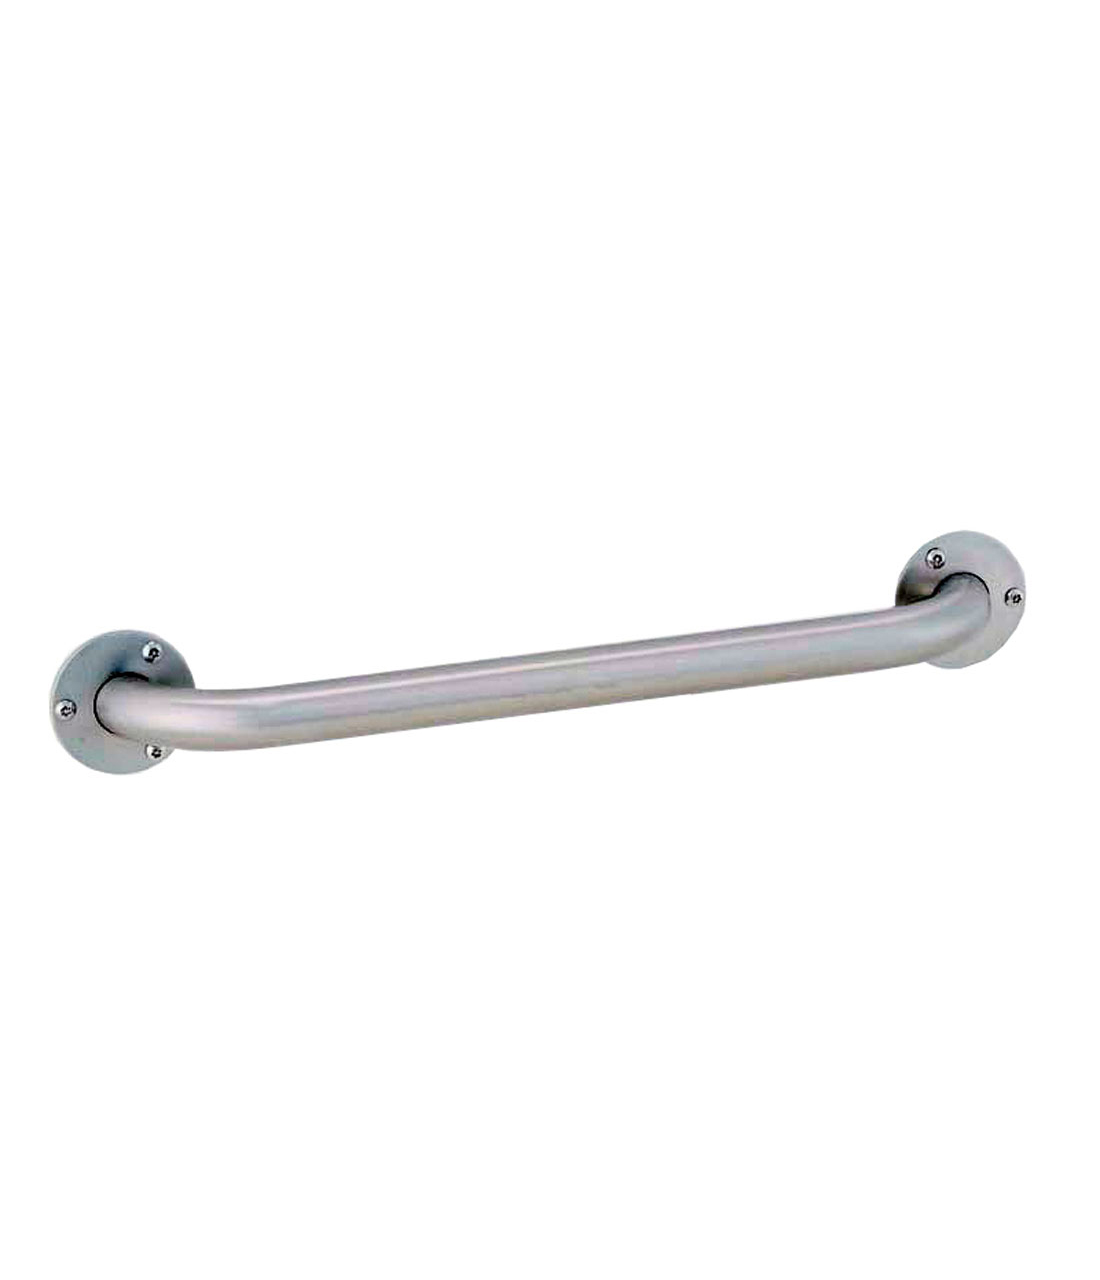 1.25 Inch Diameter Straight Grab Bar with Exposed Flange - (Model #: 125e-series-exposed)-image